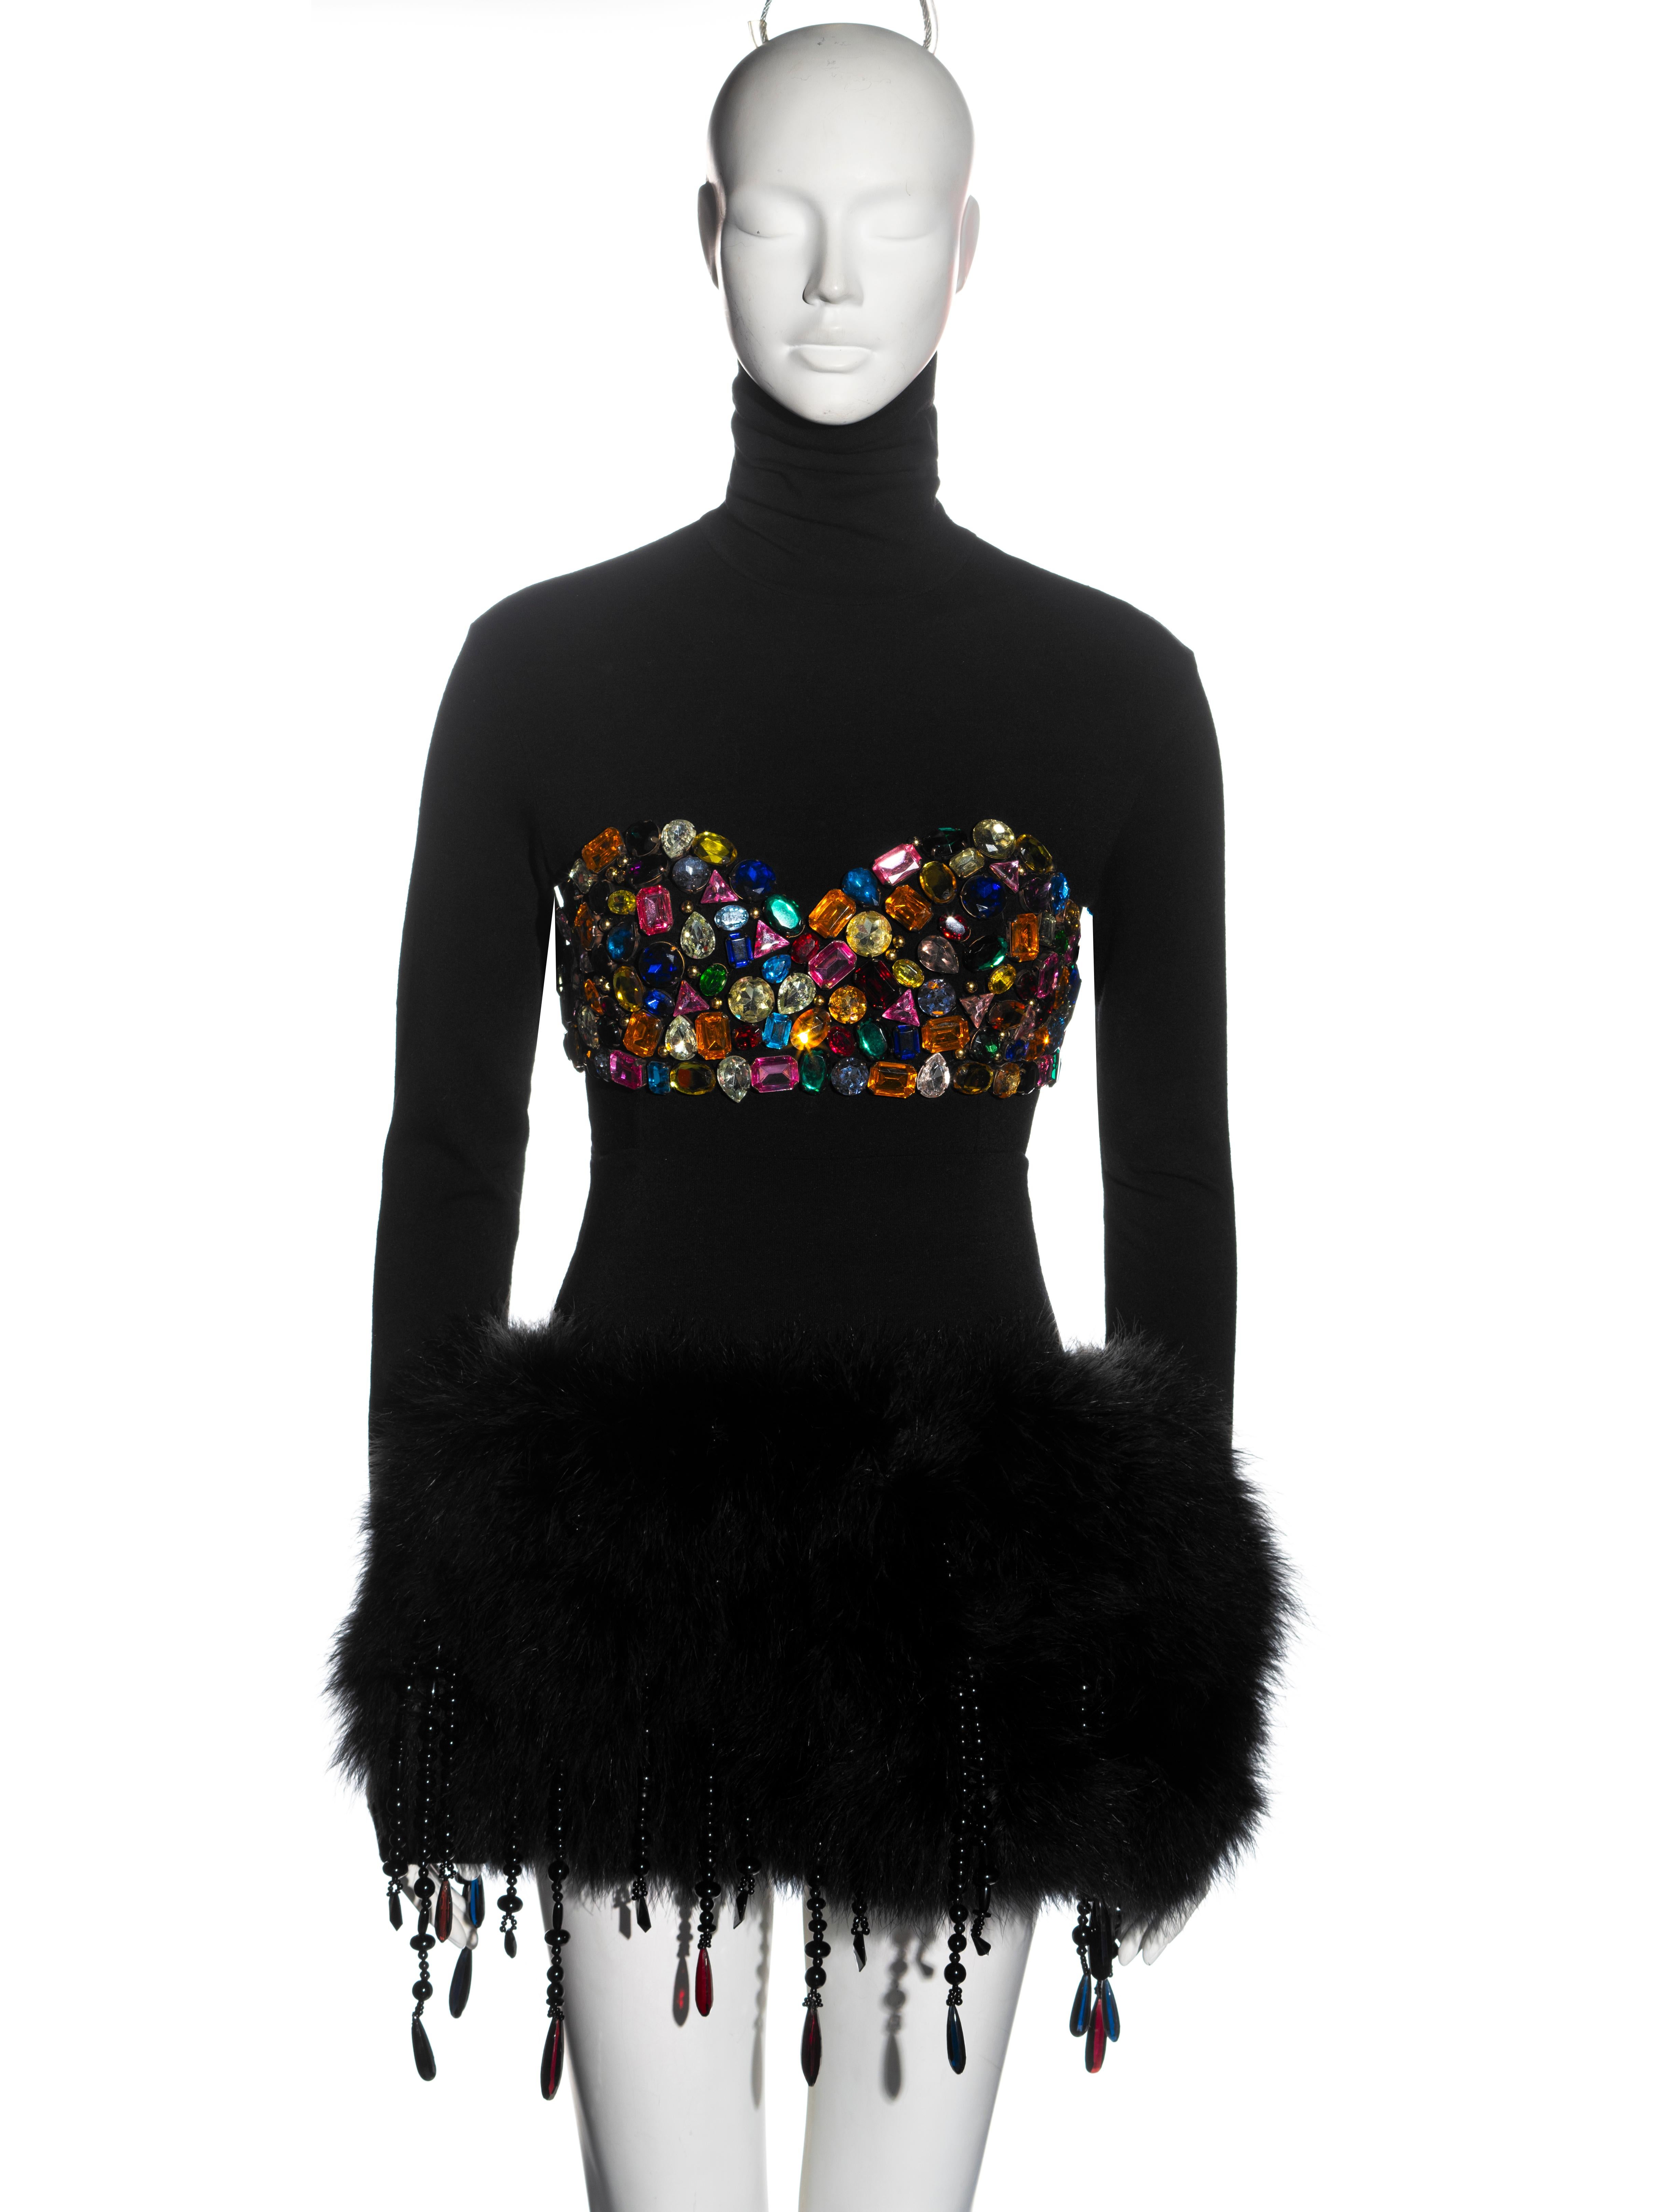 ▪ Dolce & Gabbana top and skirt set 
▪ Turtleneck top with large multicoloured crystal embellishments in a shape of a bra
▪ Marabou feather puffball mini skirt with beaded tassel trim 
▪ IT 42 - FR 38 - UK 10 - US 6
▪ Fall-Winter 1991
▪ Made in